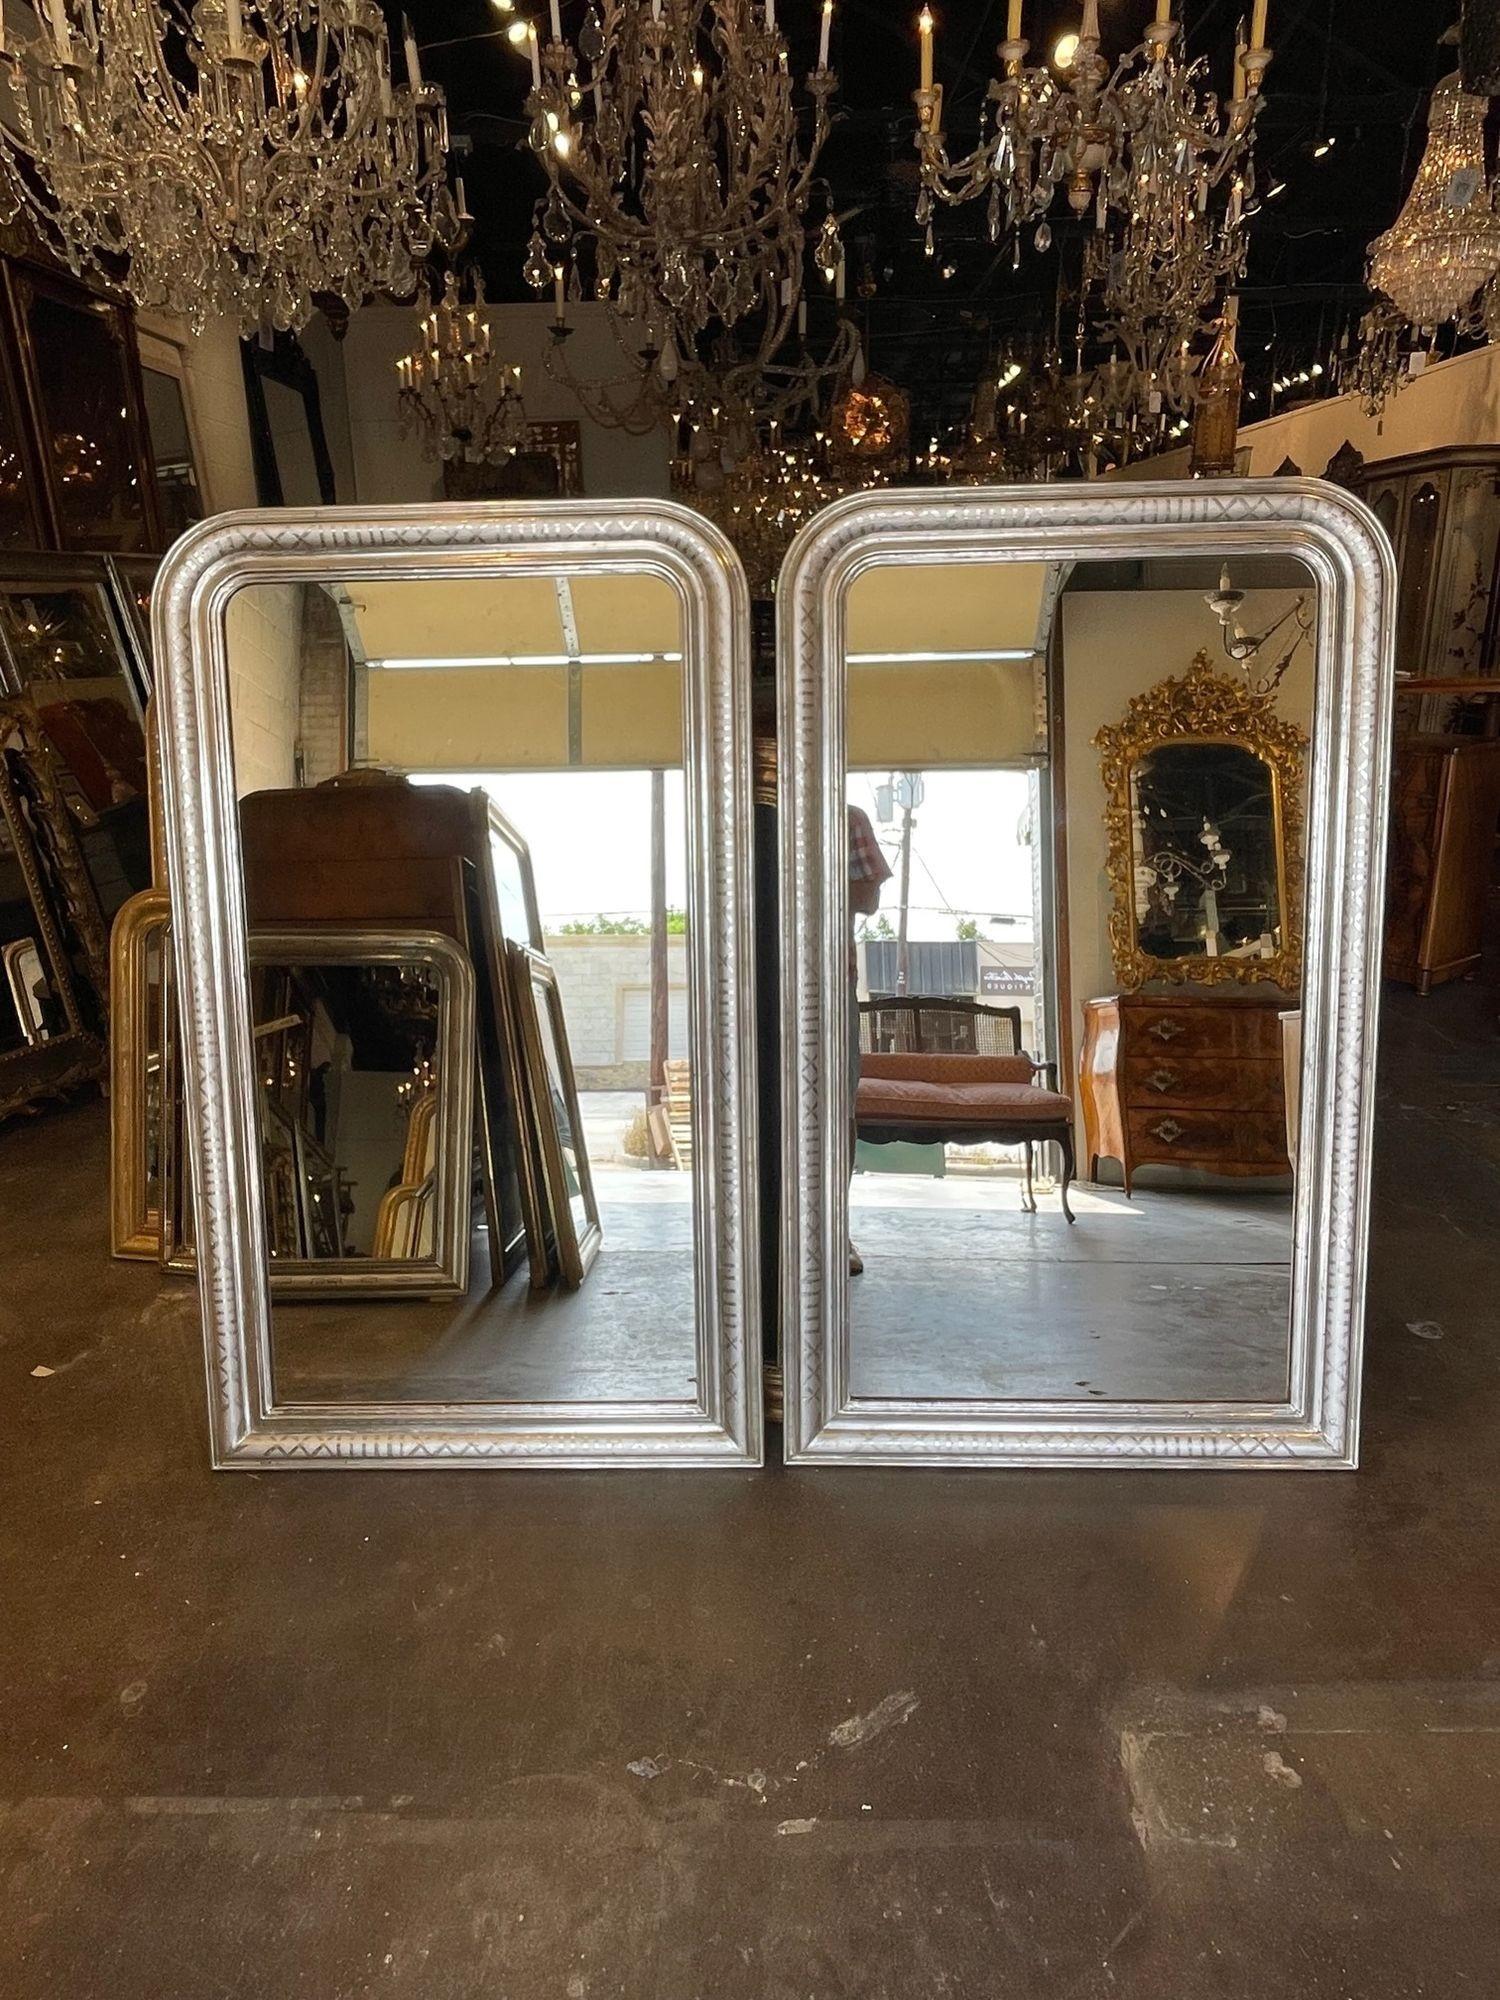 Very fine pair of French Louis Philippe style mirrors with geometric pattern. Very fine quality and patina on these! So pretty!